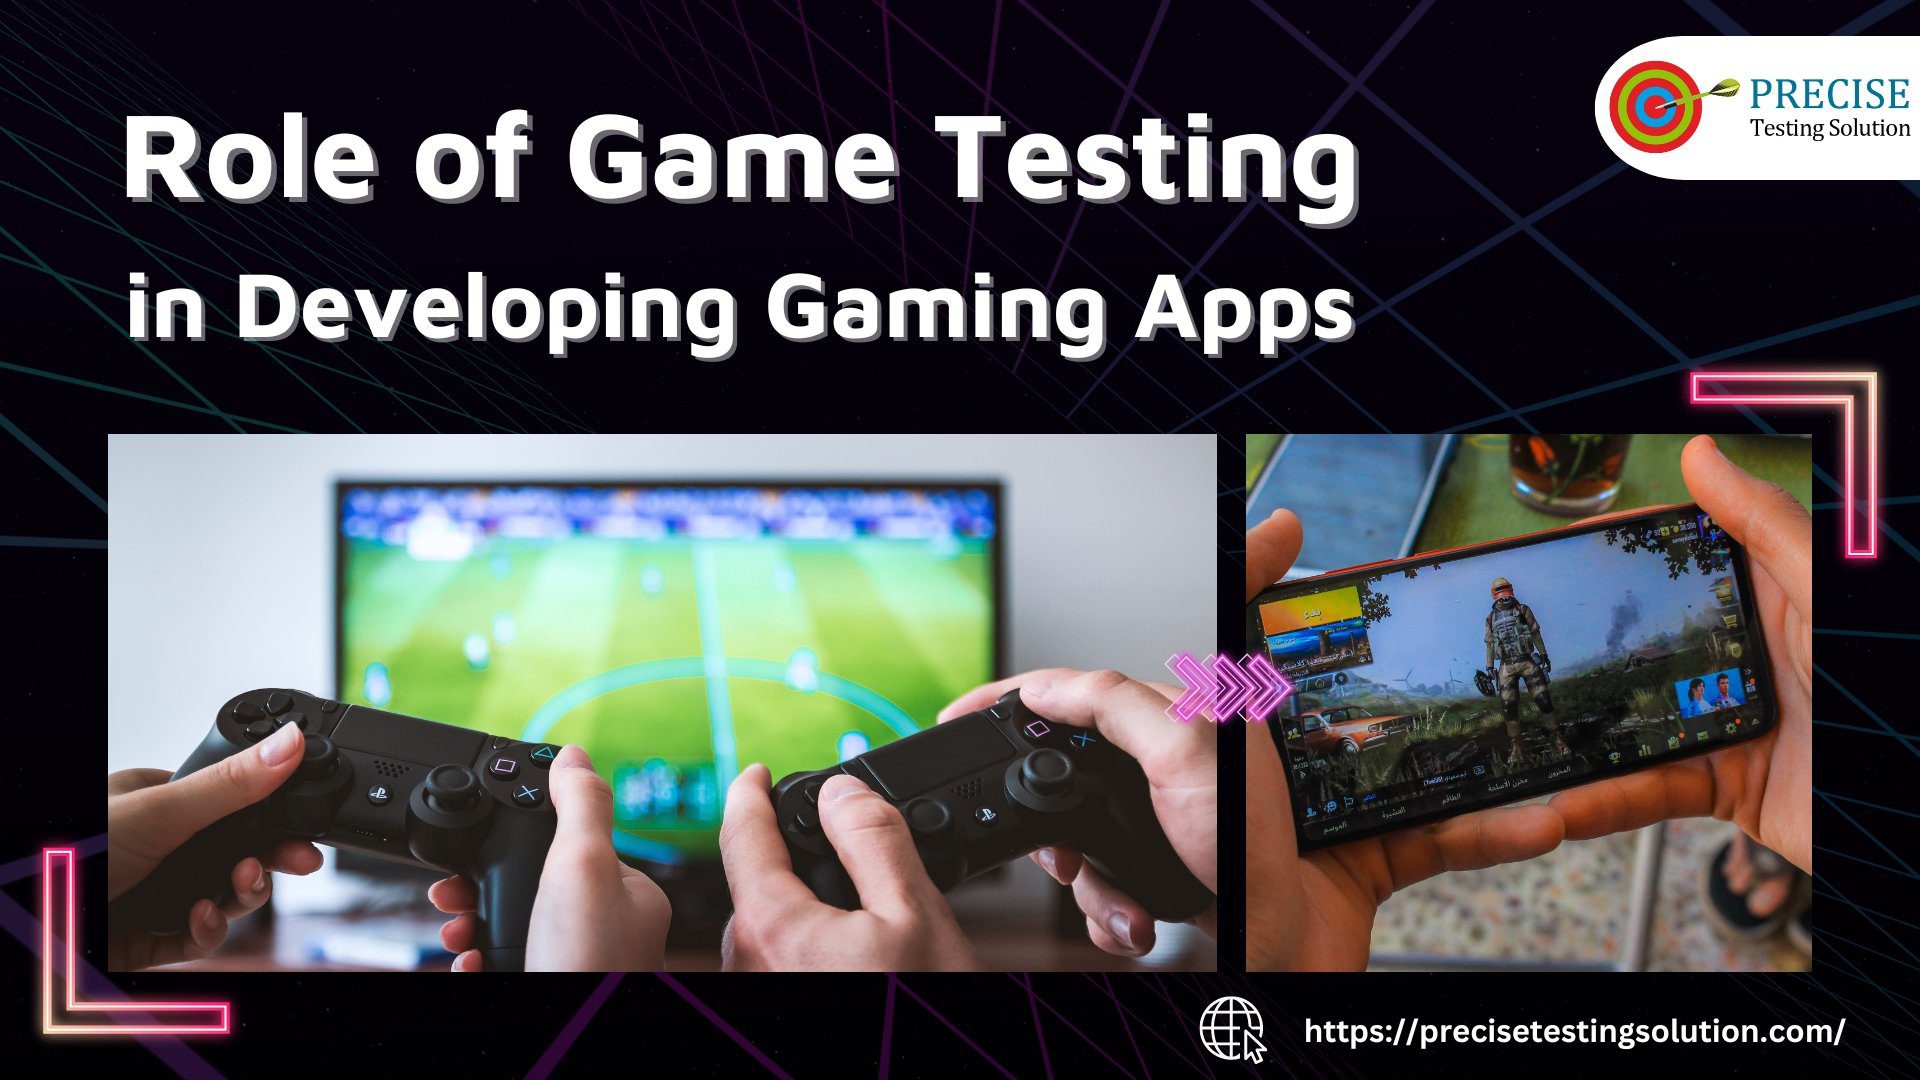 Role of Game Testing in Developing Gaming Apps